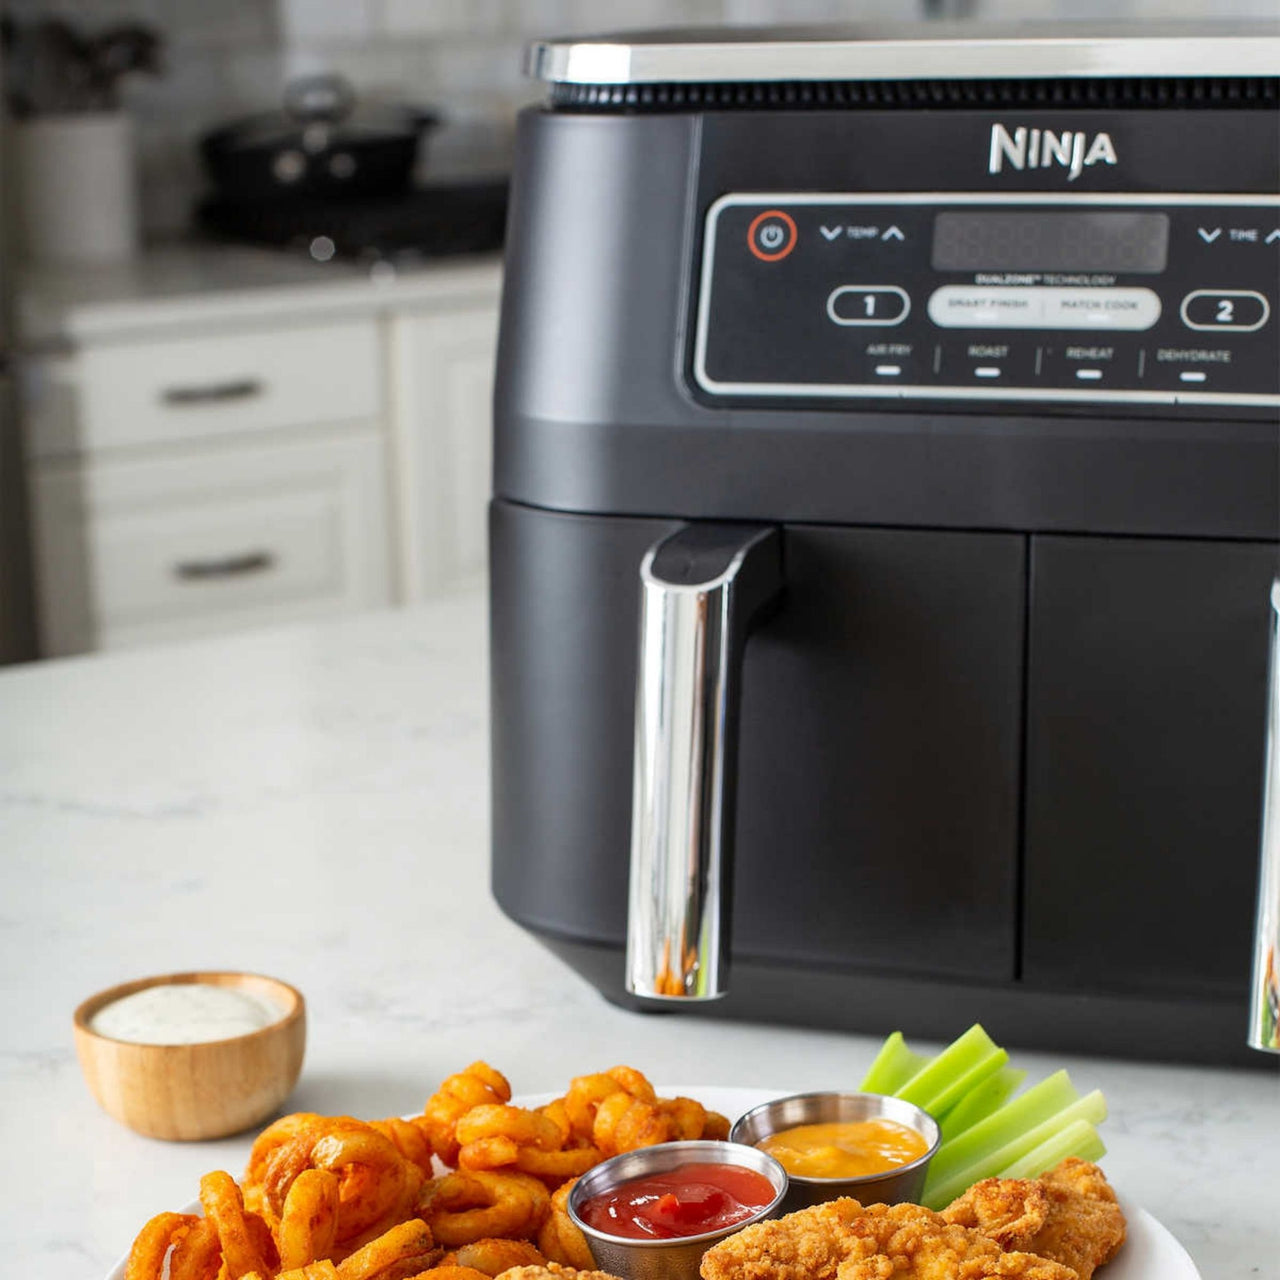 Image of Ninja Foodi 4-in-1 8-qt. 2-basket Air Fryer with DualZone Technology